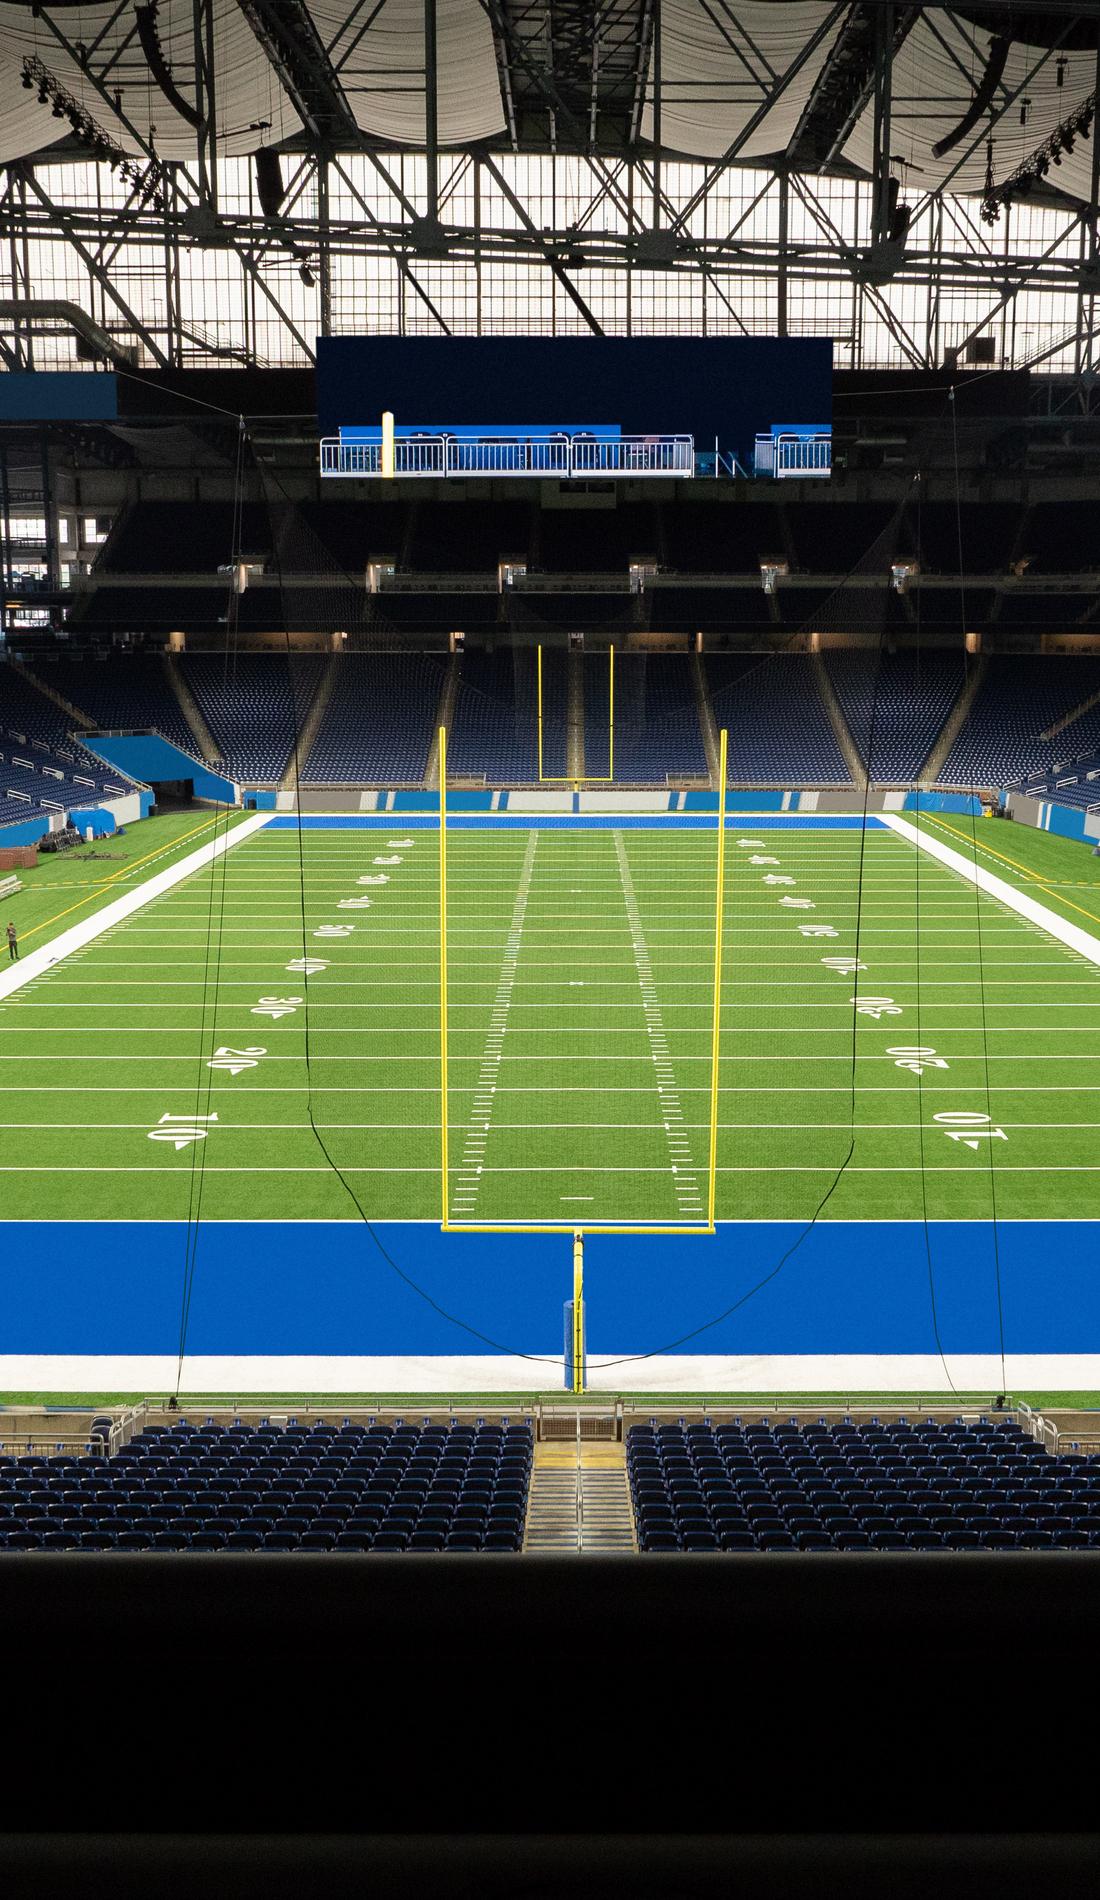 Free online tickets for Jets-Bills game at Ford Field all gone